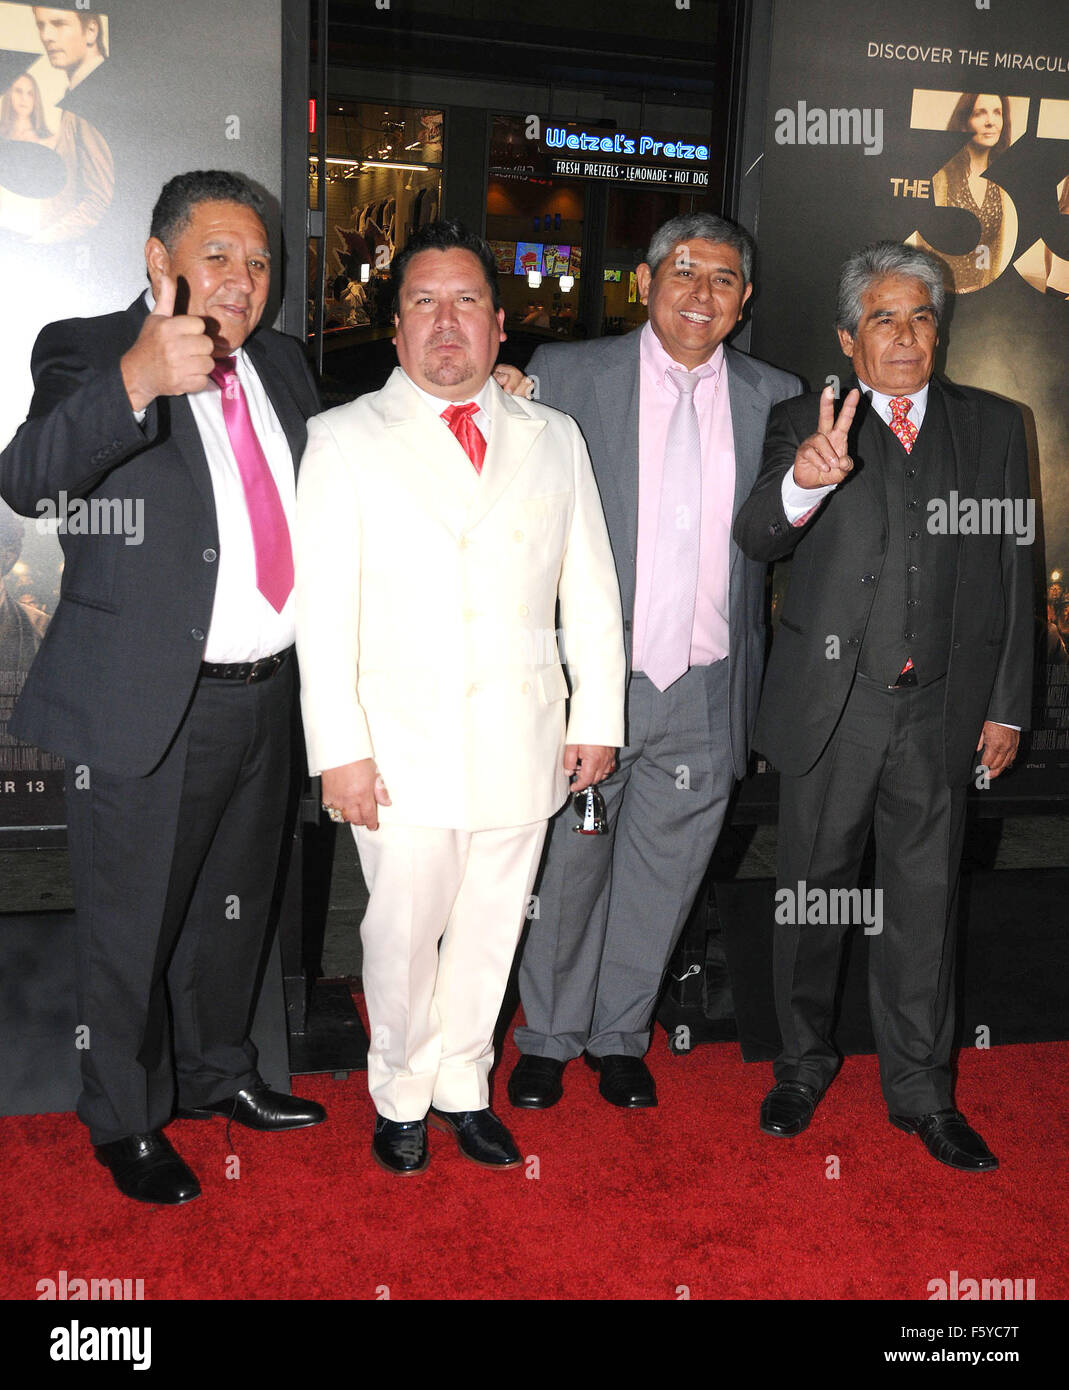 Hollywood, California, USA. 9th Nov, 2015. CHILEAN MINERS: LUIS URZUA, EDISON 'ELVIS' PENA, JUAN CARLOS AGUILAR, MARIO GOMEZ at the AFI Fest 'The 33' Premiere Los Angeles Premiere held at the TCL Chinese Theater. Credit:  Paul Fenton/ZUMA Wire/Alamy Live News Stock Photo